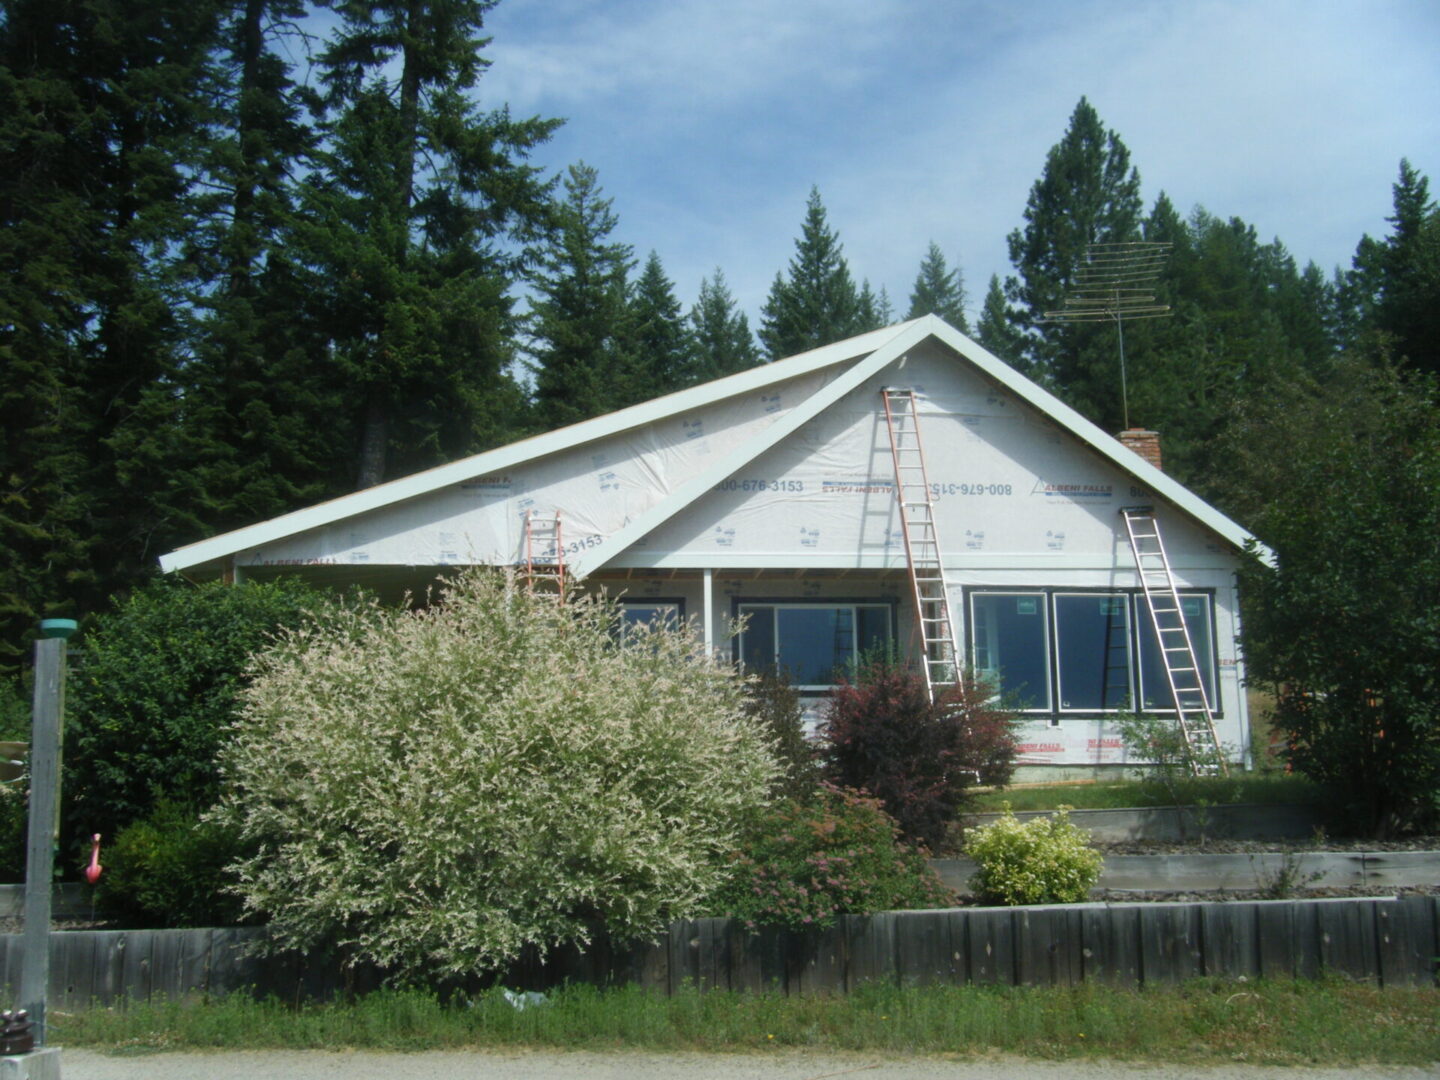 A bungalow house being remodeled